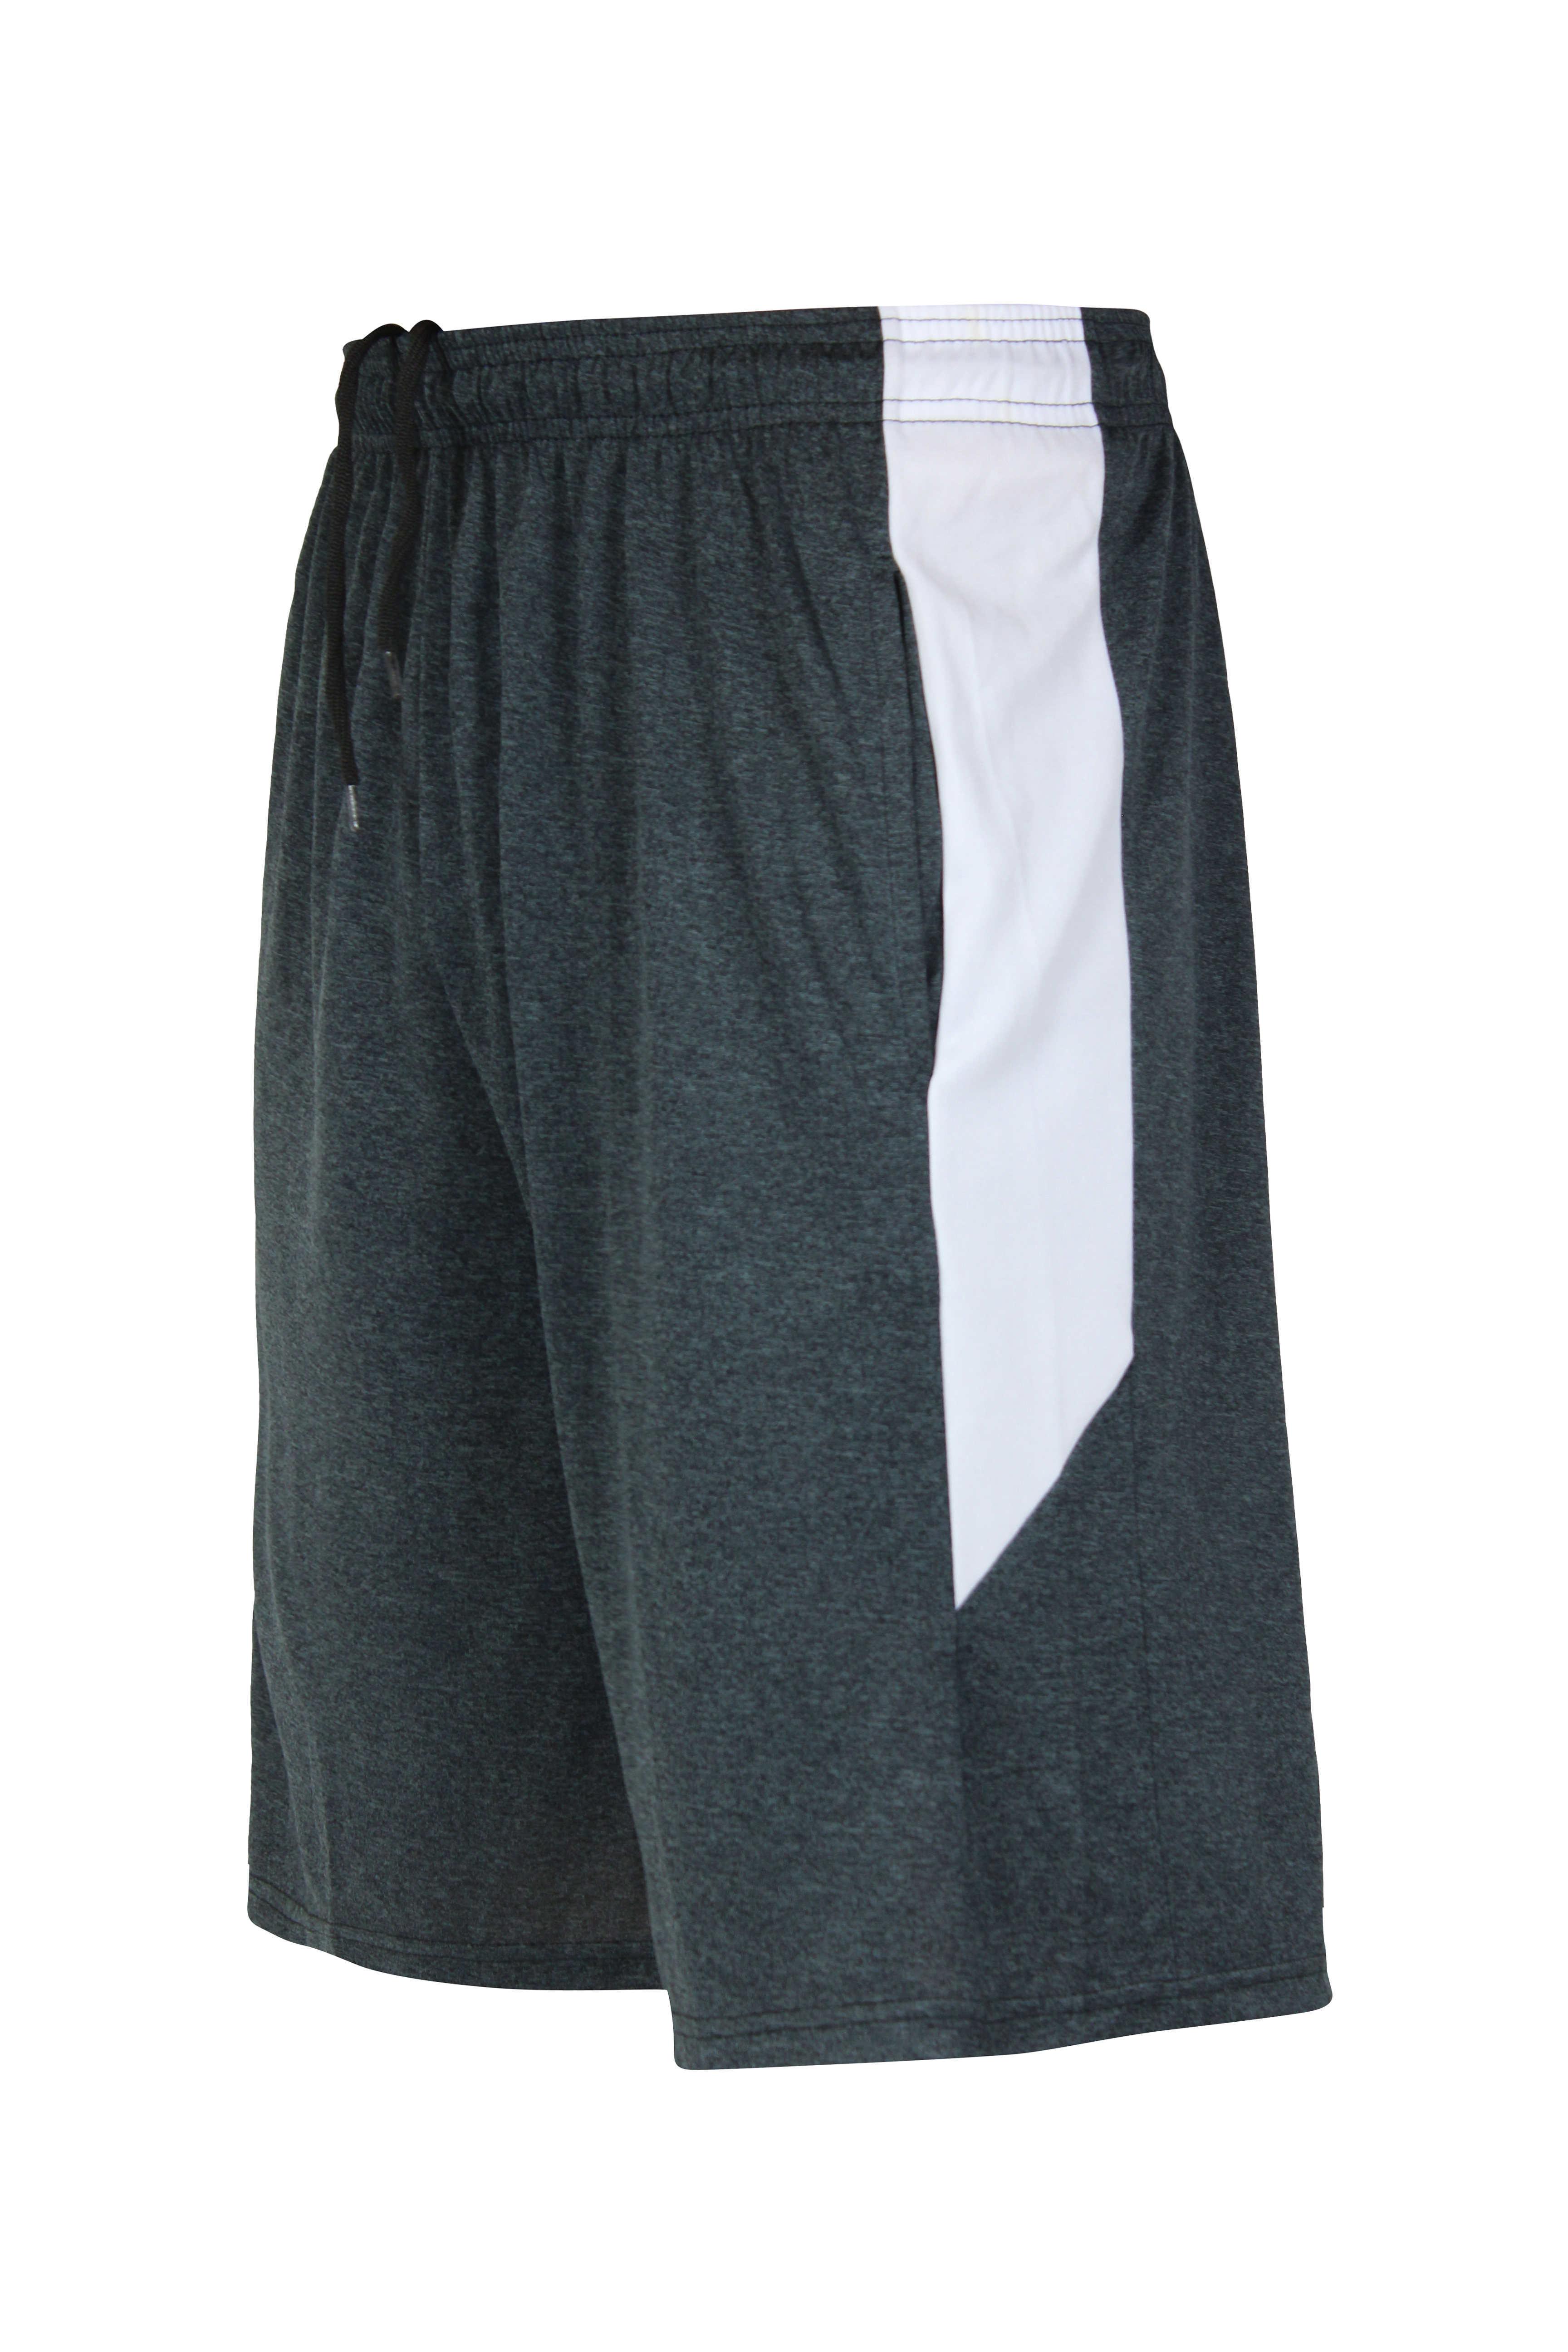 Real Essentials Youth Dry-Fit Athletic 5-Pack Gym Shorts with Pockets, Sizes 5-18 - image 3 of 6